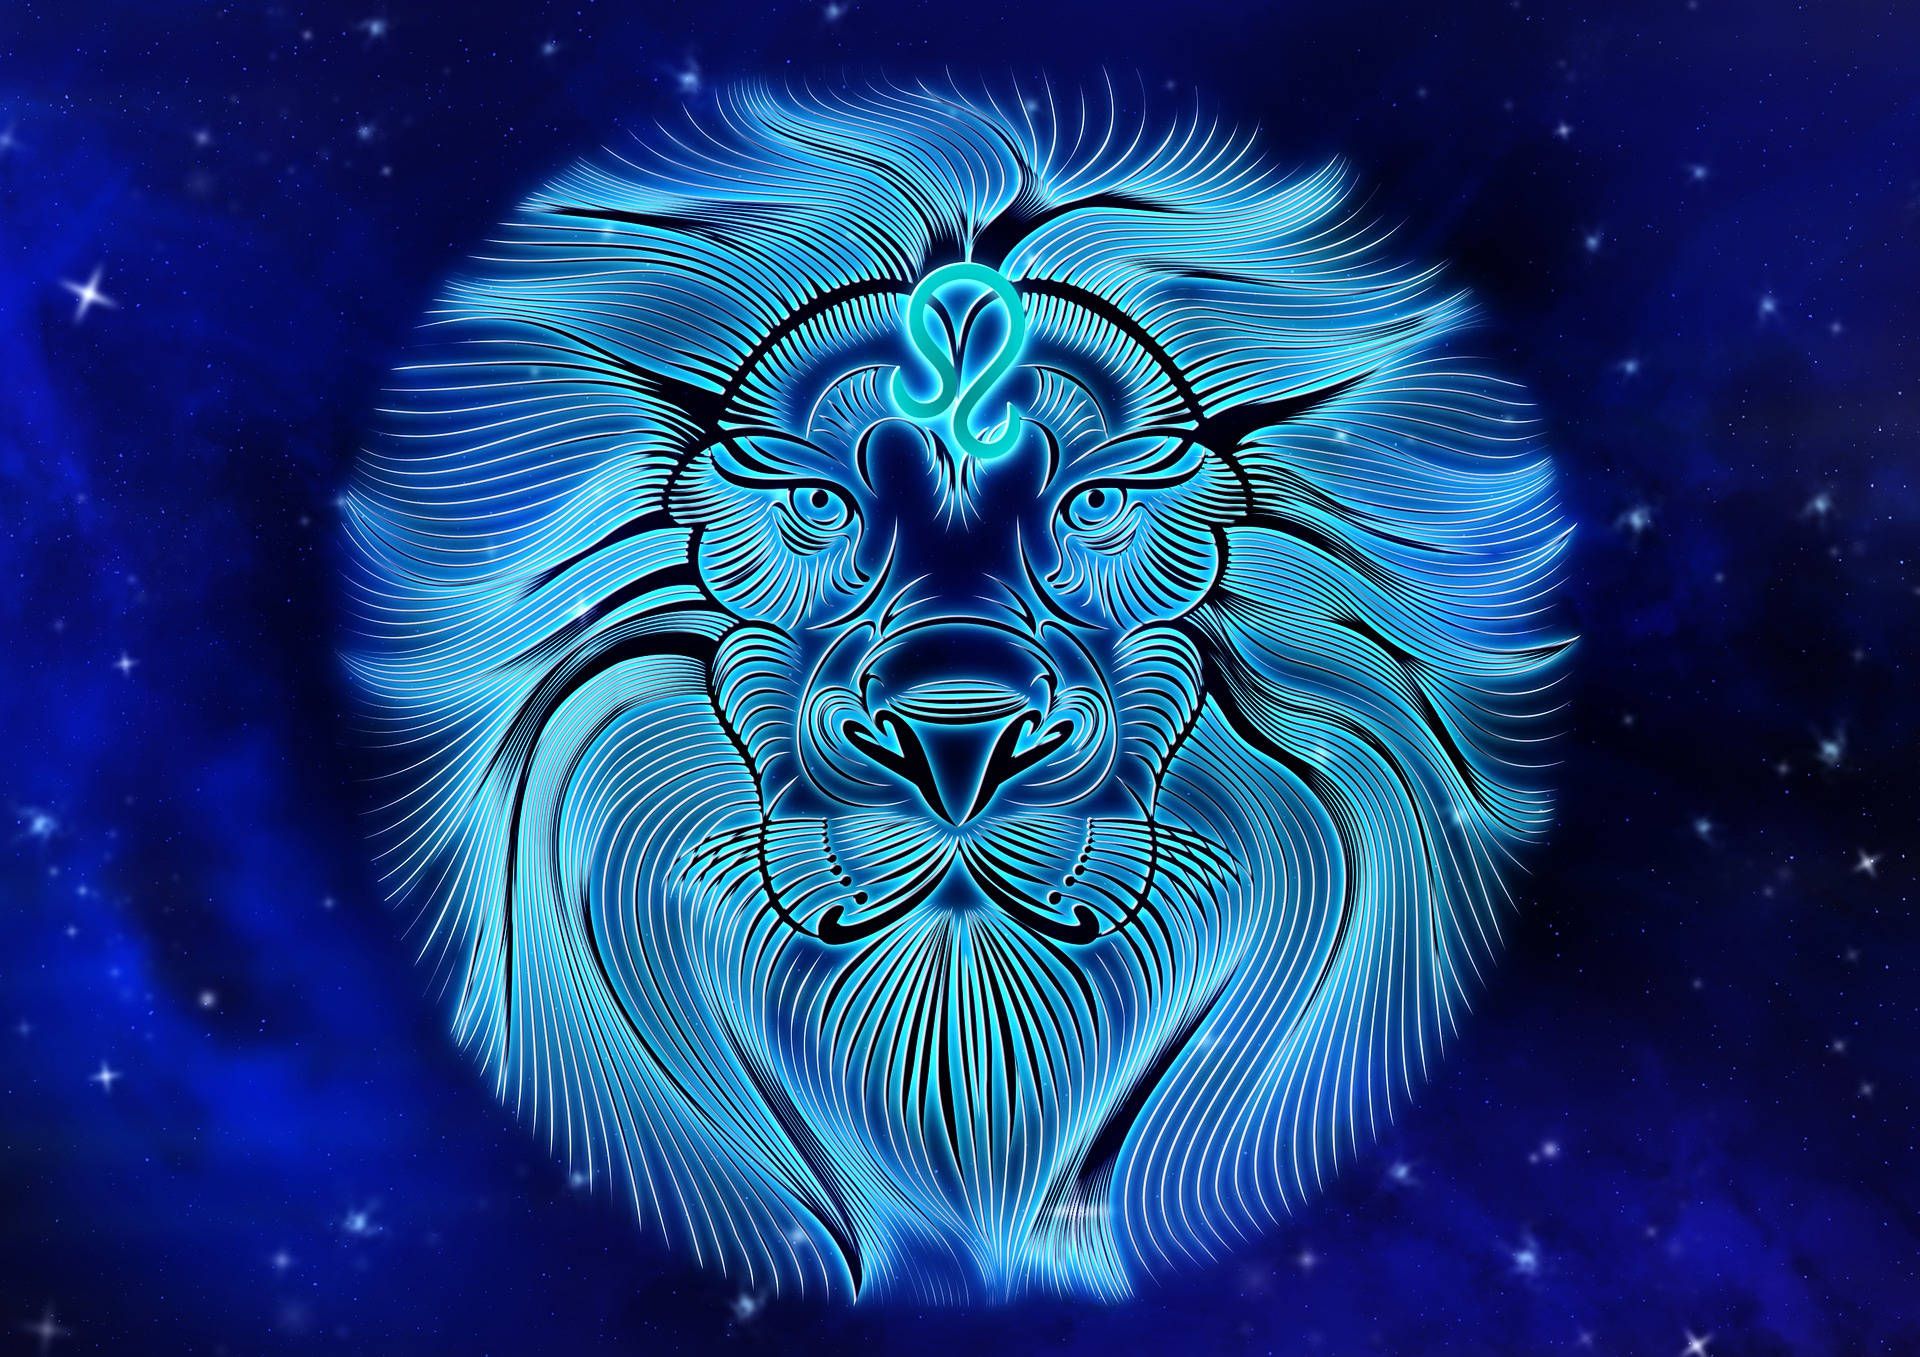 Leo is the fifth sign of the zodiac and is represented by the Lion. - Leo